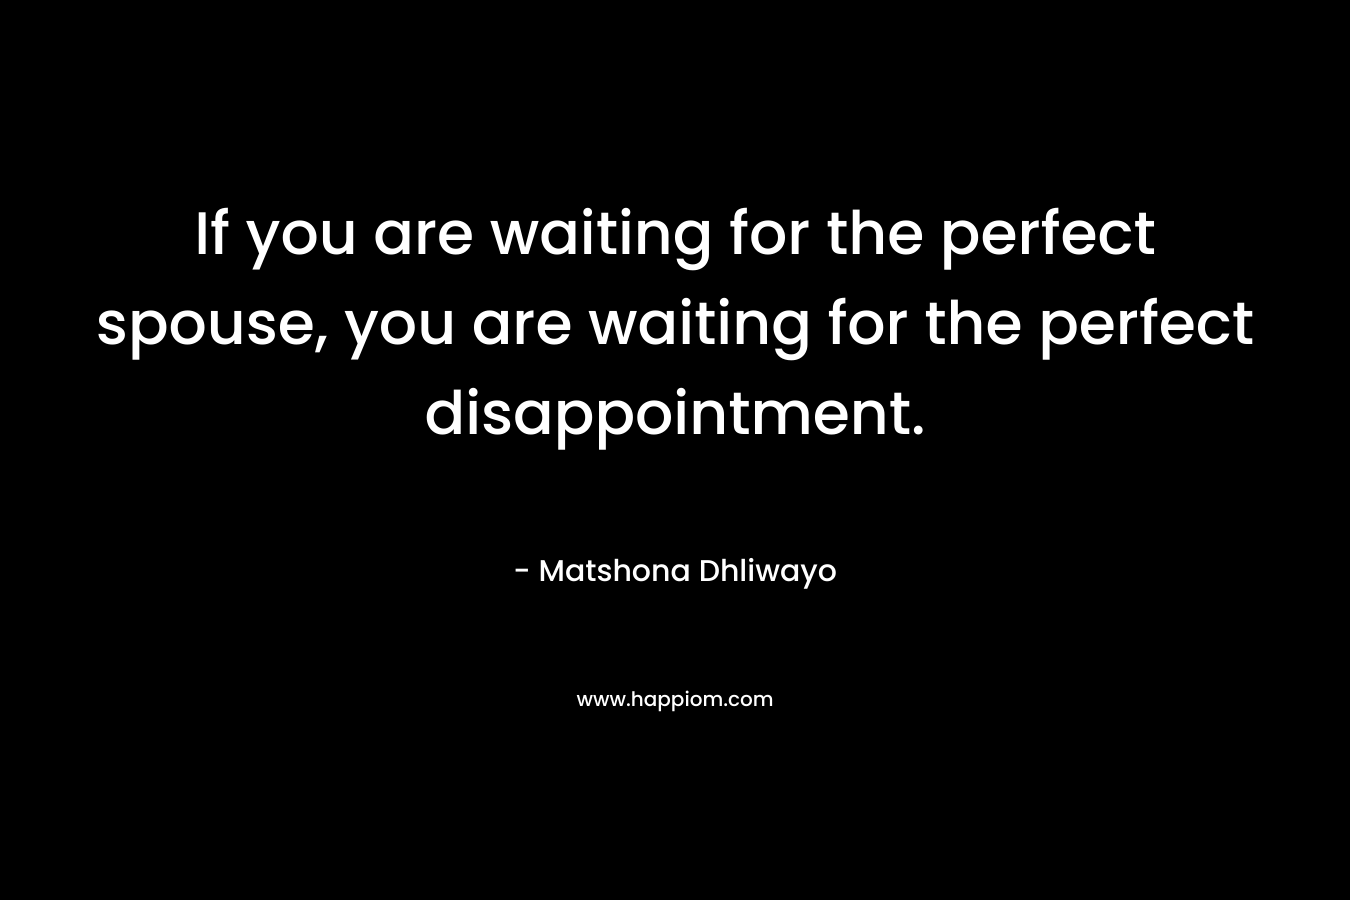 If you are waiting for the perfect spouse, you are waiting for the perfect disappointment.